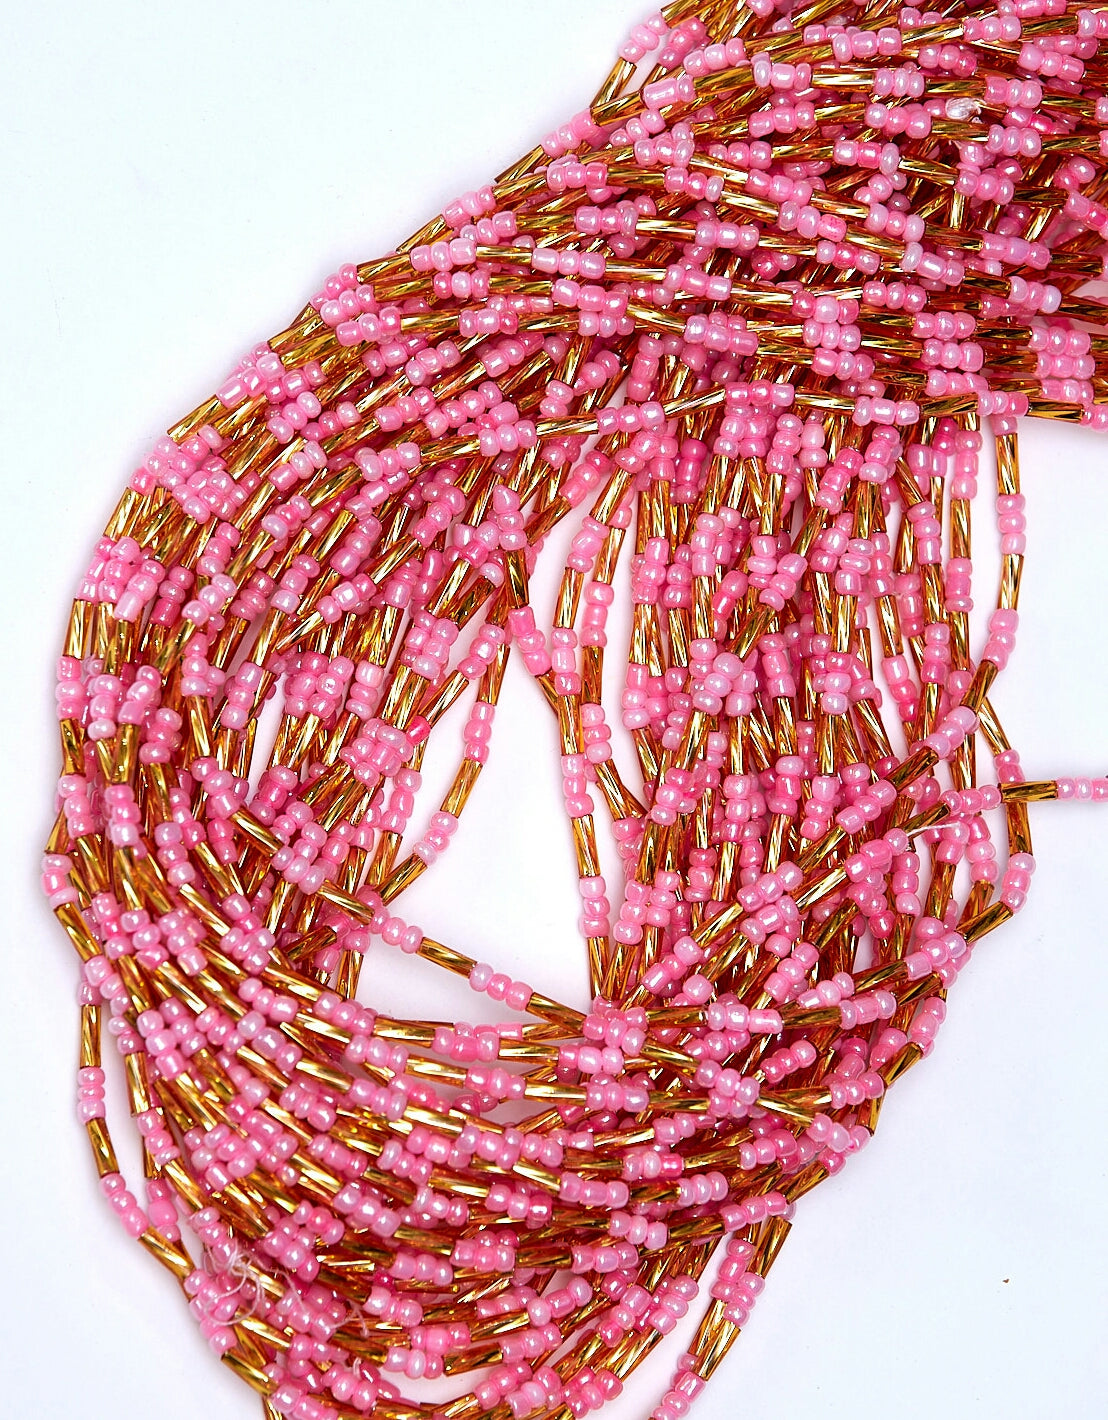 47 Inches Pink beads With gold bars Tie on Waist Beads